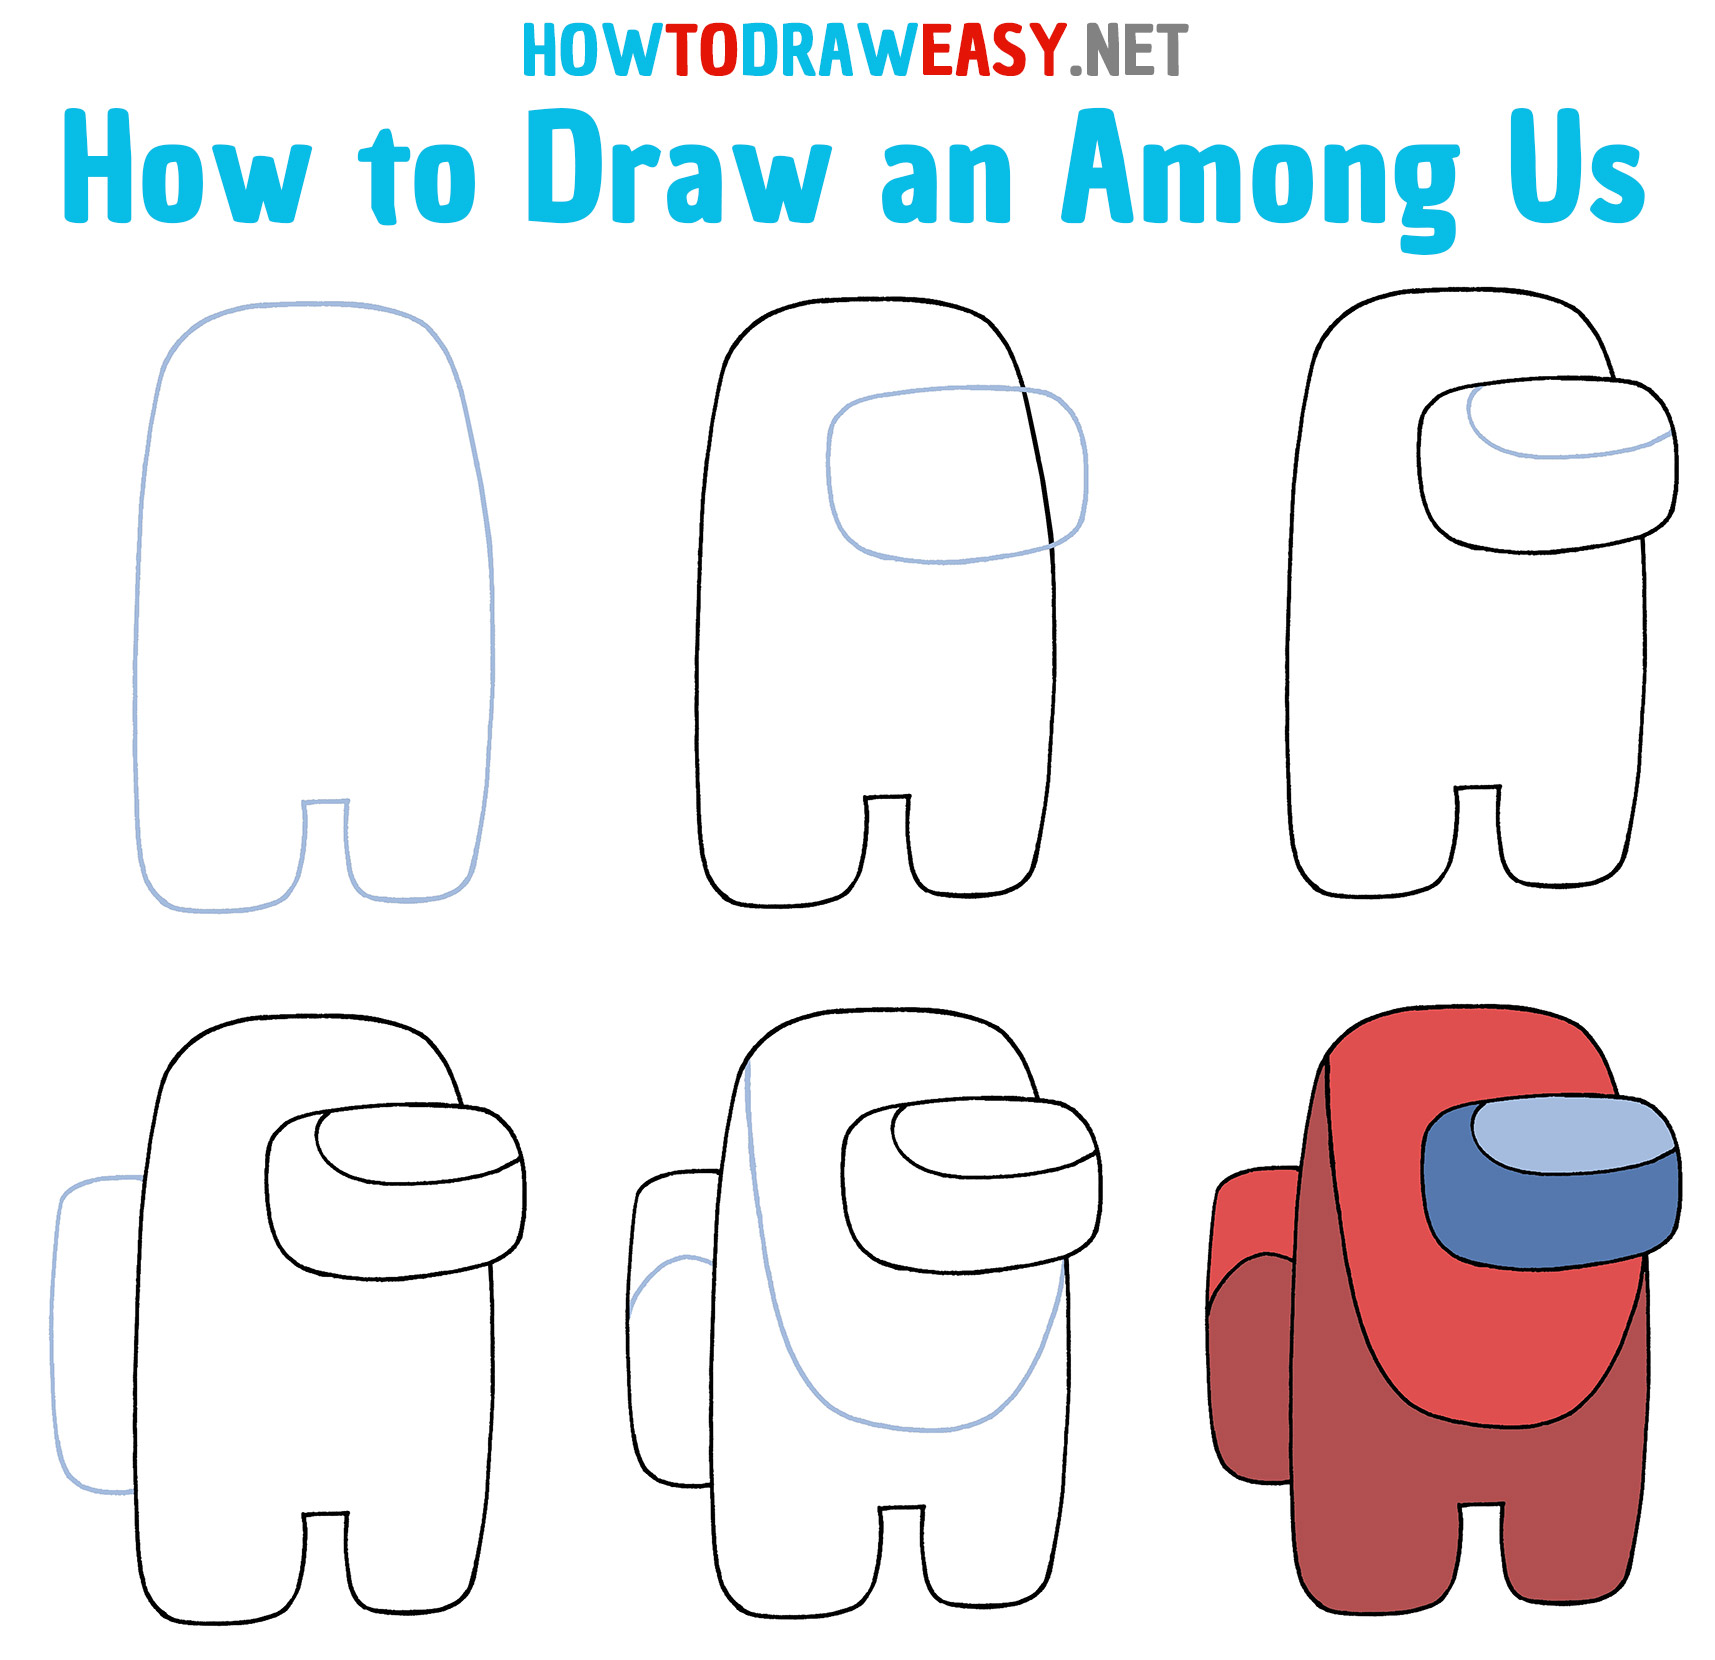 How to Draw Among Us Step by Step